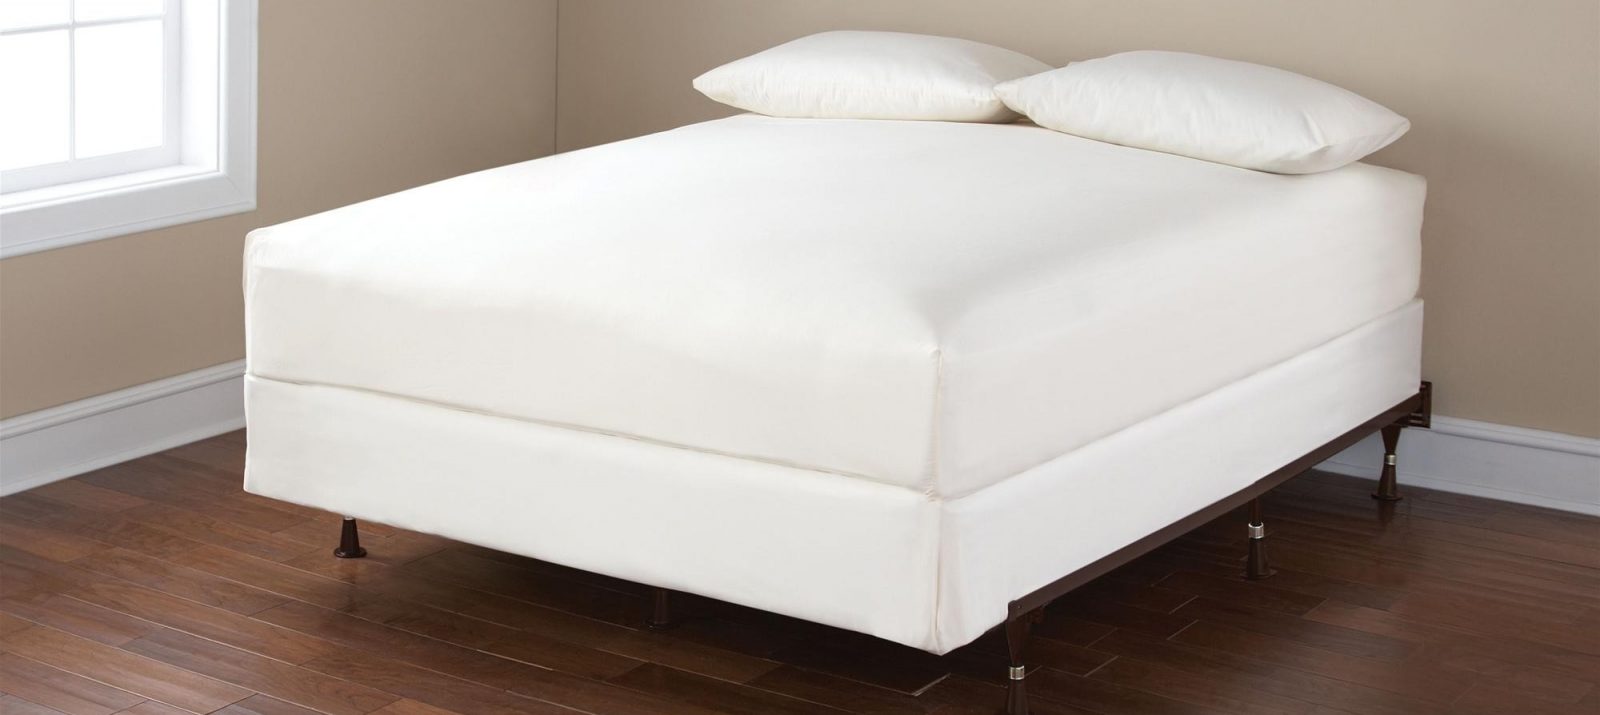 Reveal 59+ Stunning full white mattress box frame With Many New Styles